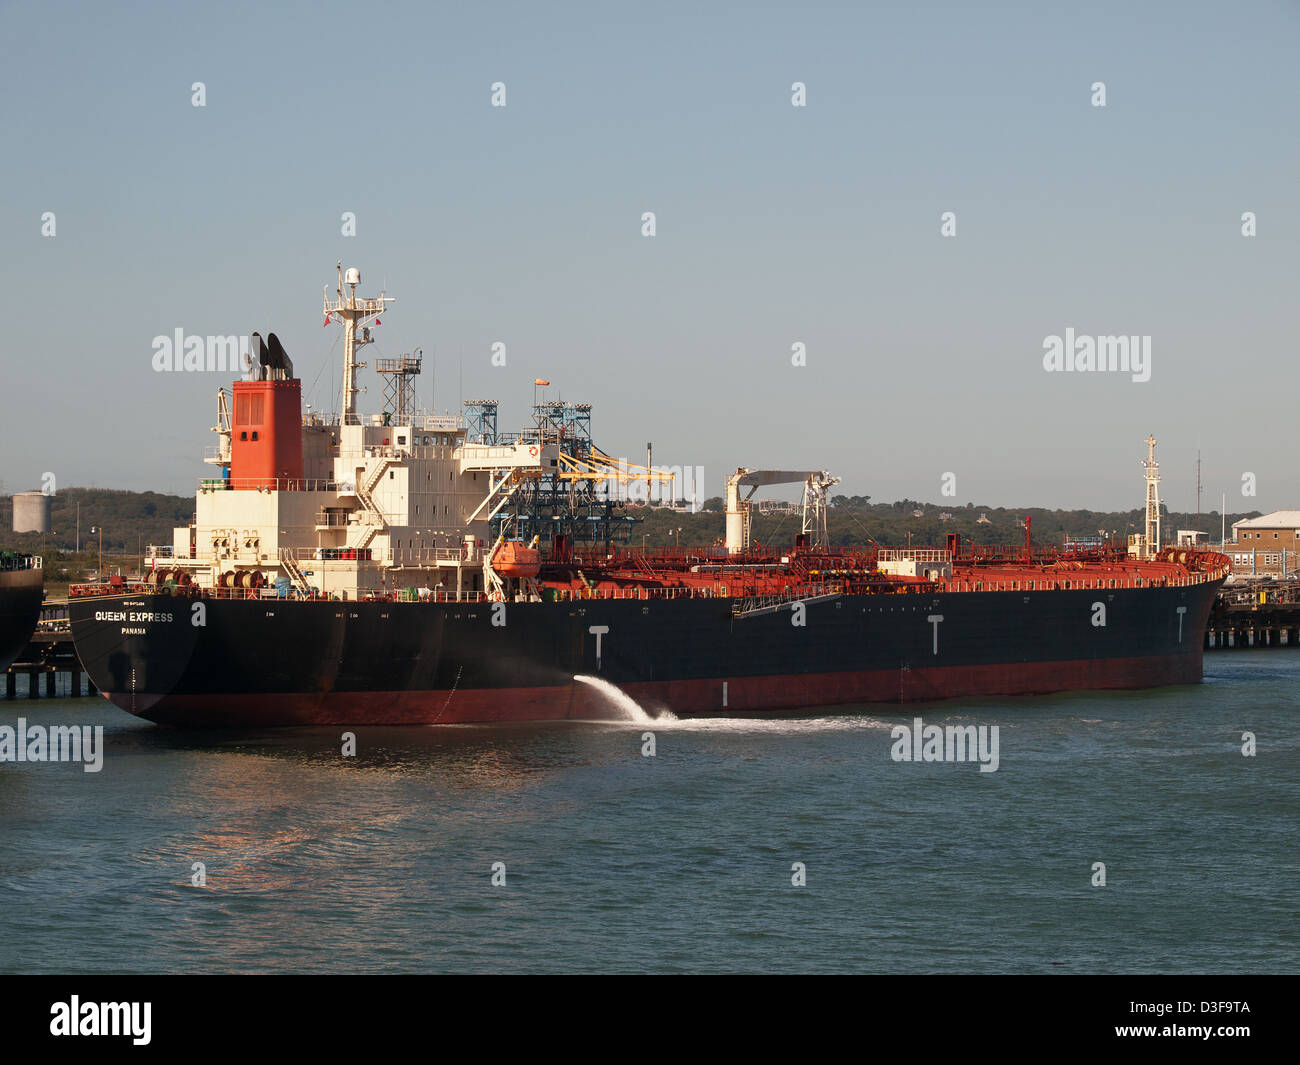 Oil tanker Queen Express berthed at the Esso Fawley oil refinery Hampshire England UK Stock Photo